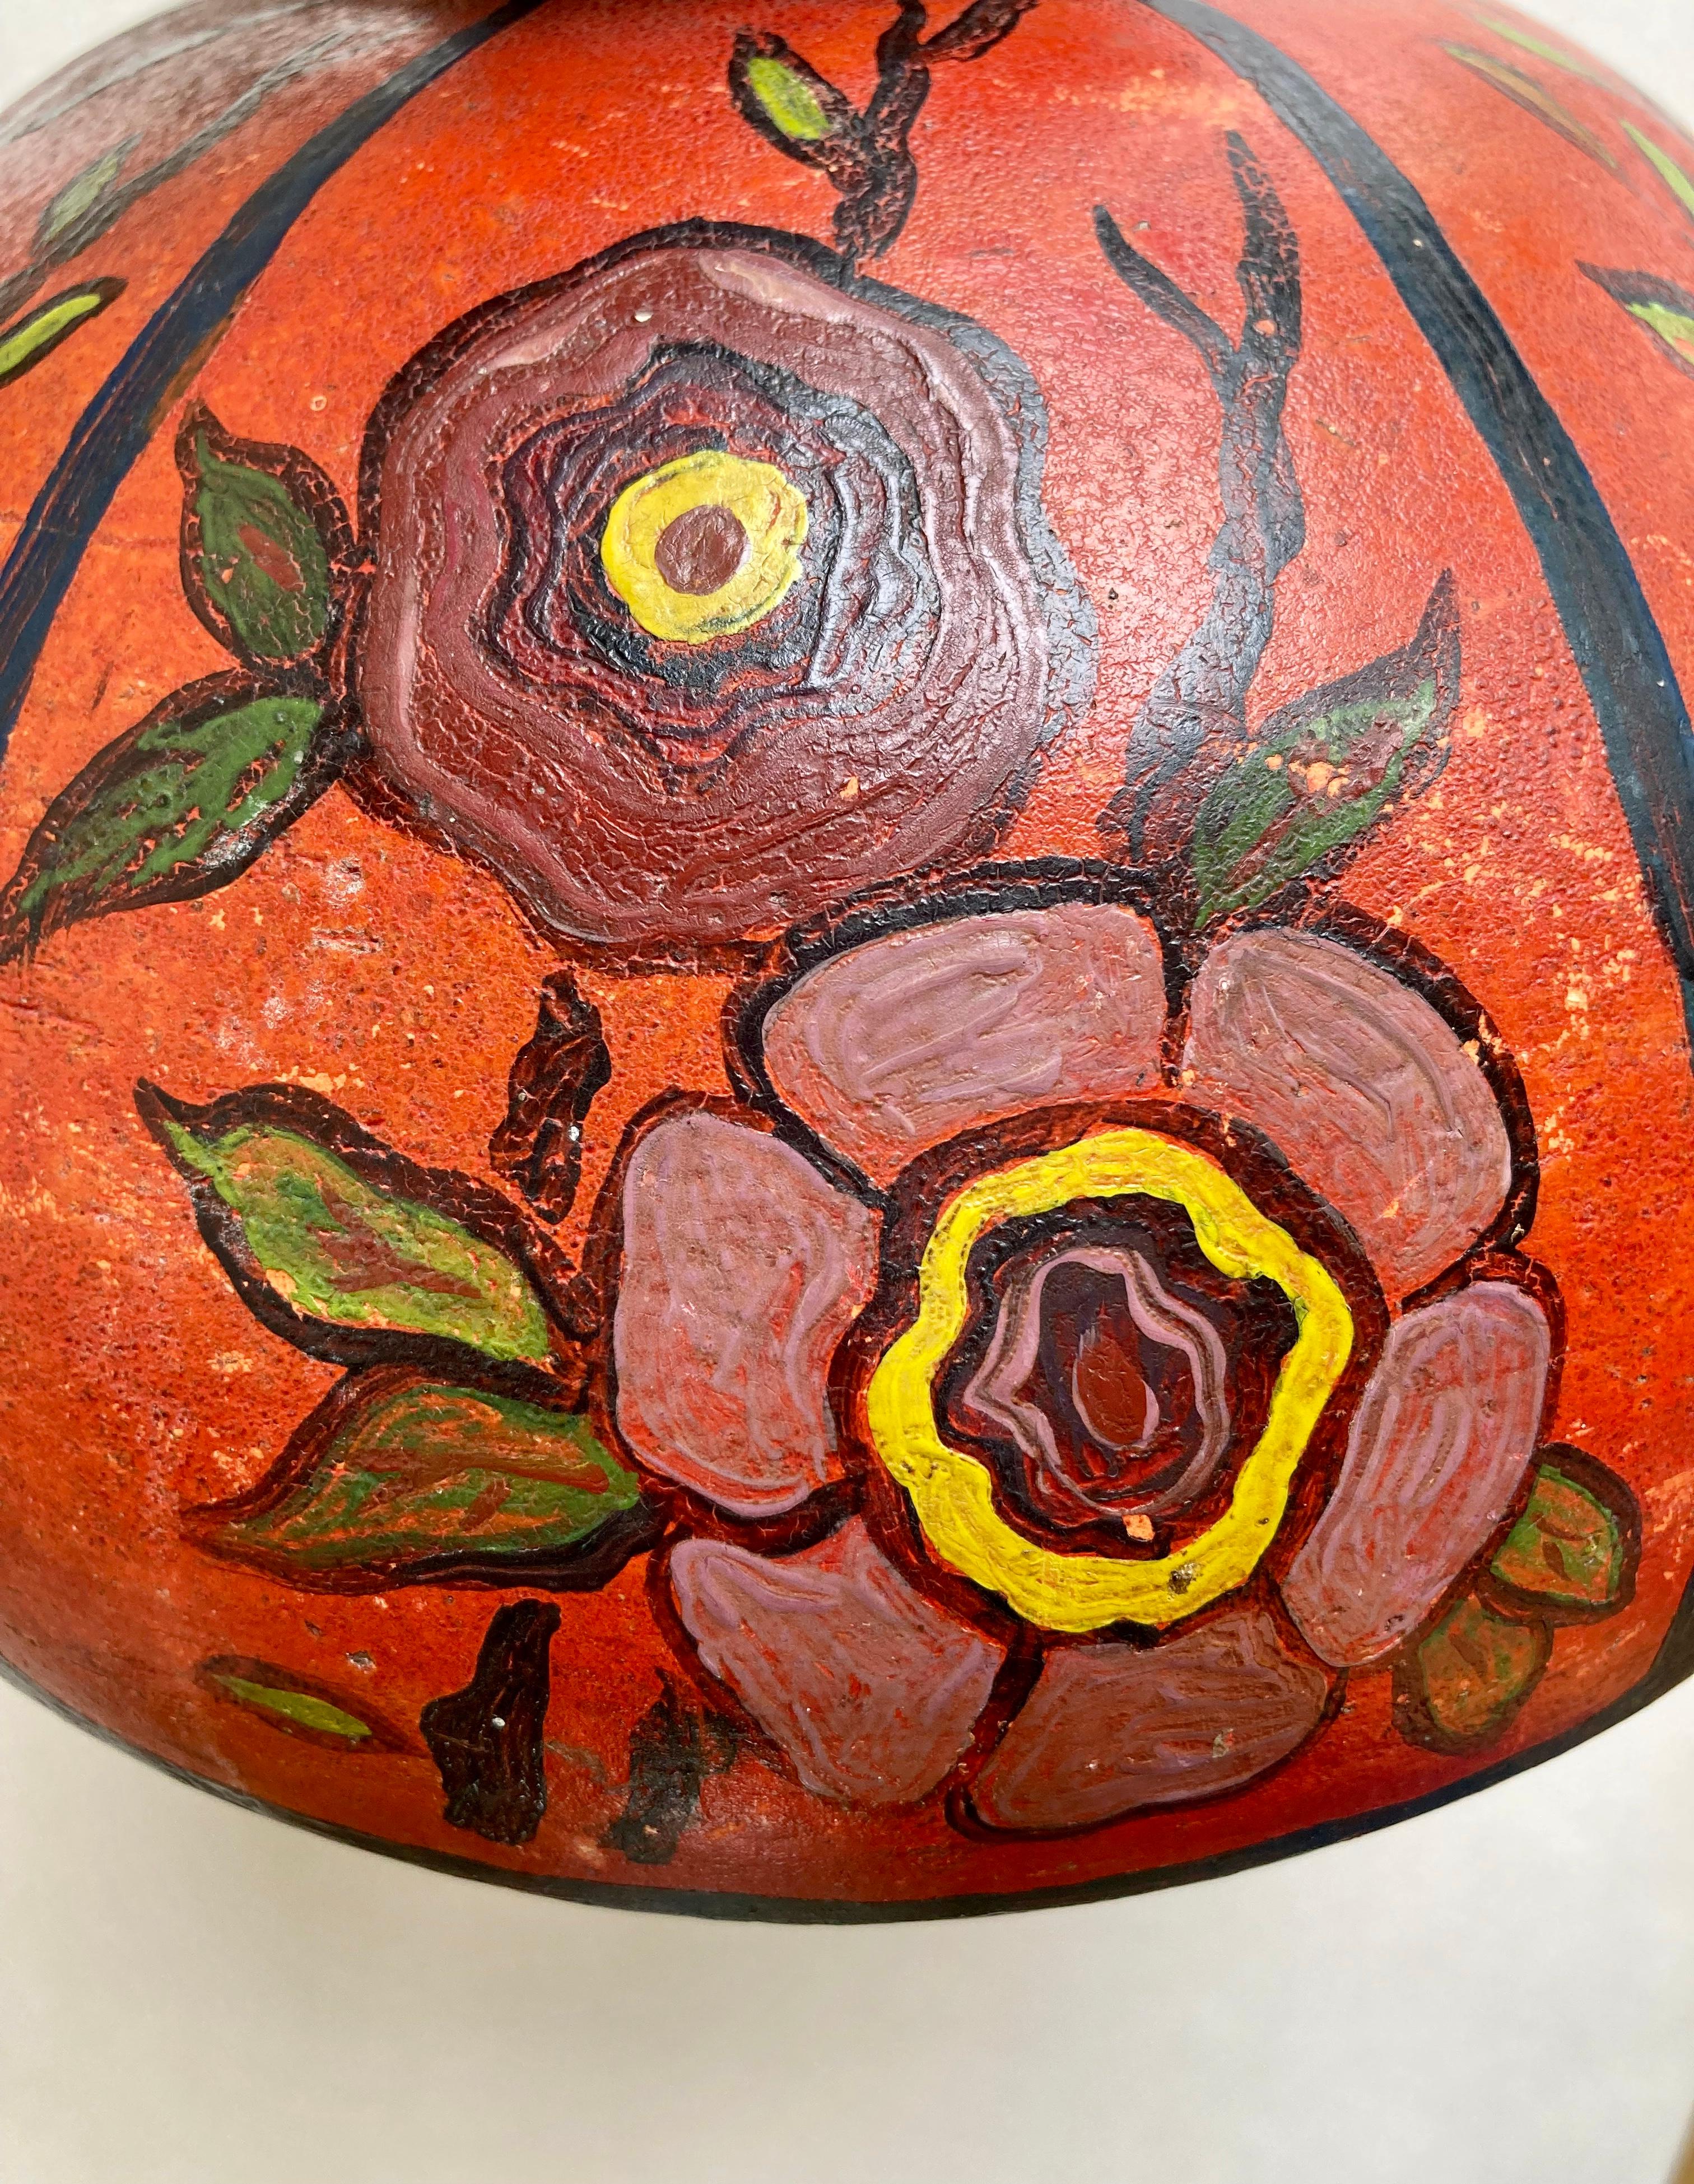 Antique Hand-Thrown and Hand-Painted Art Pottery Vase with Floral Motifs   For Sale 2